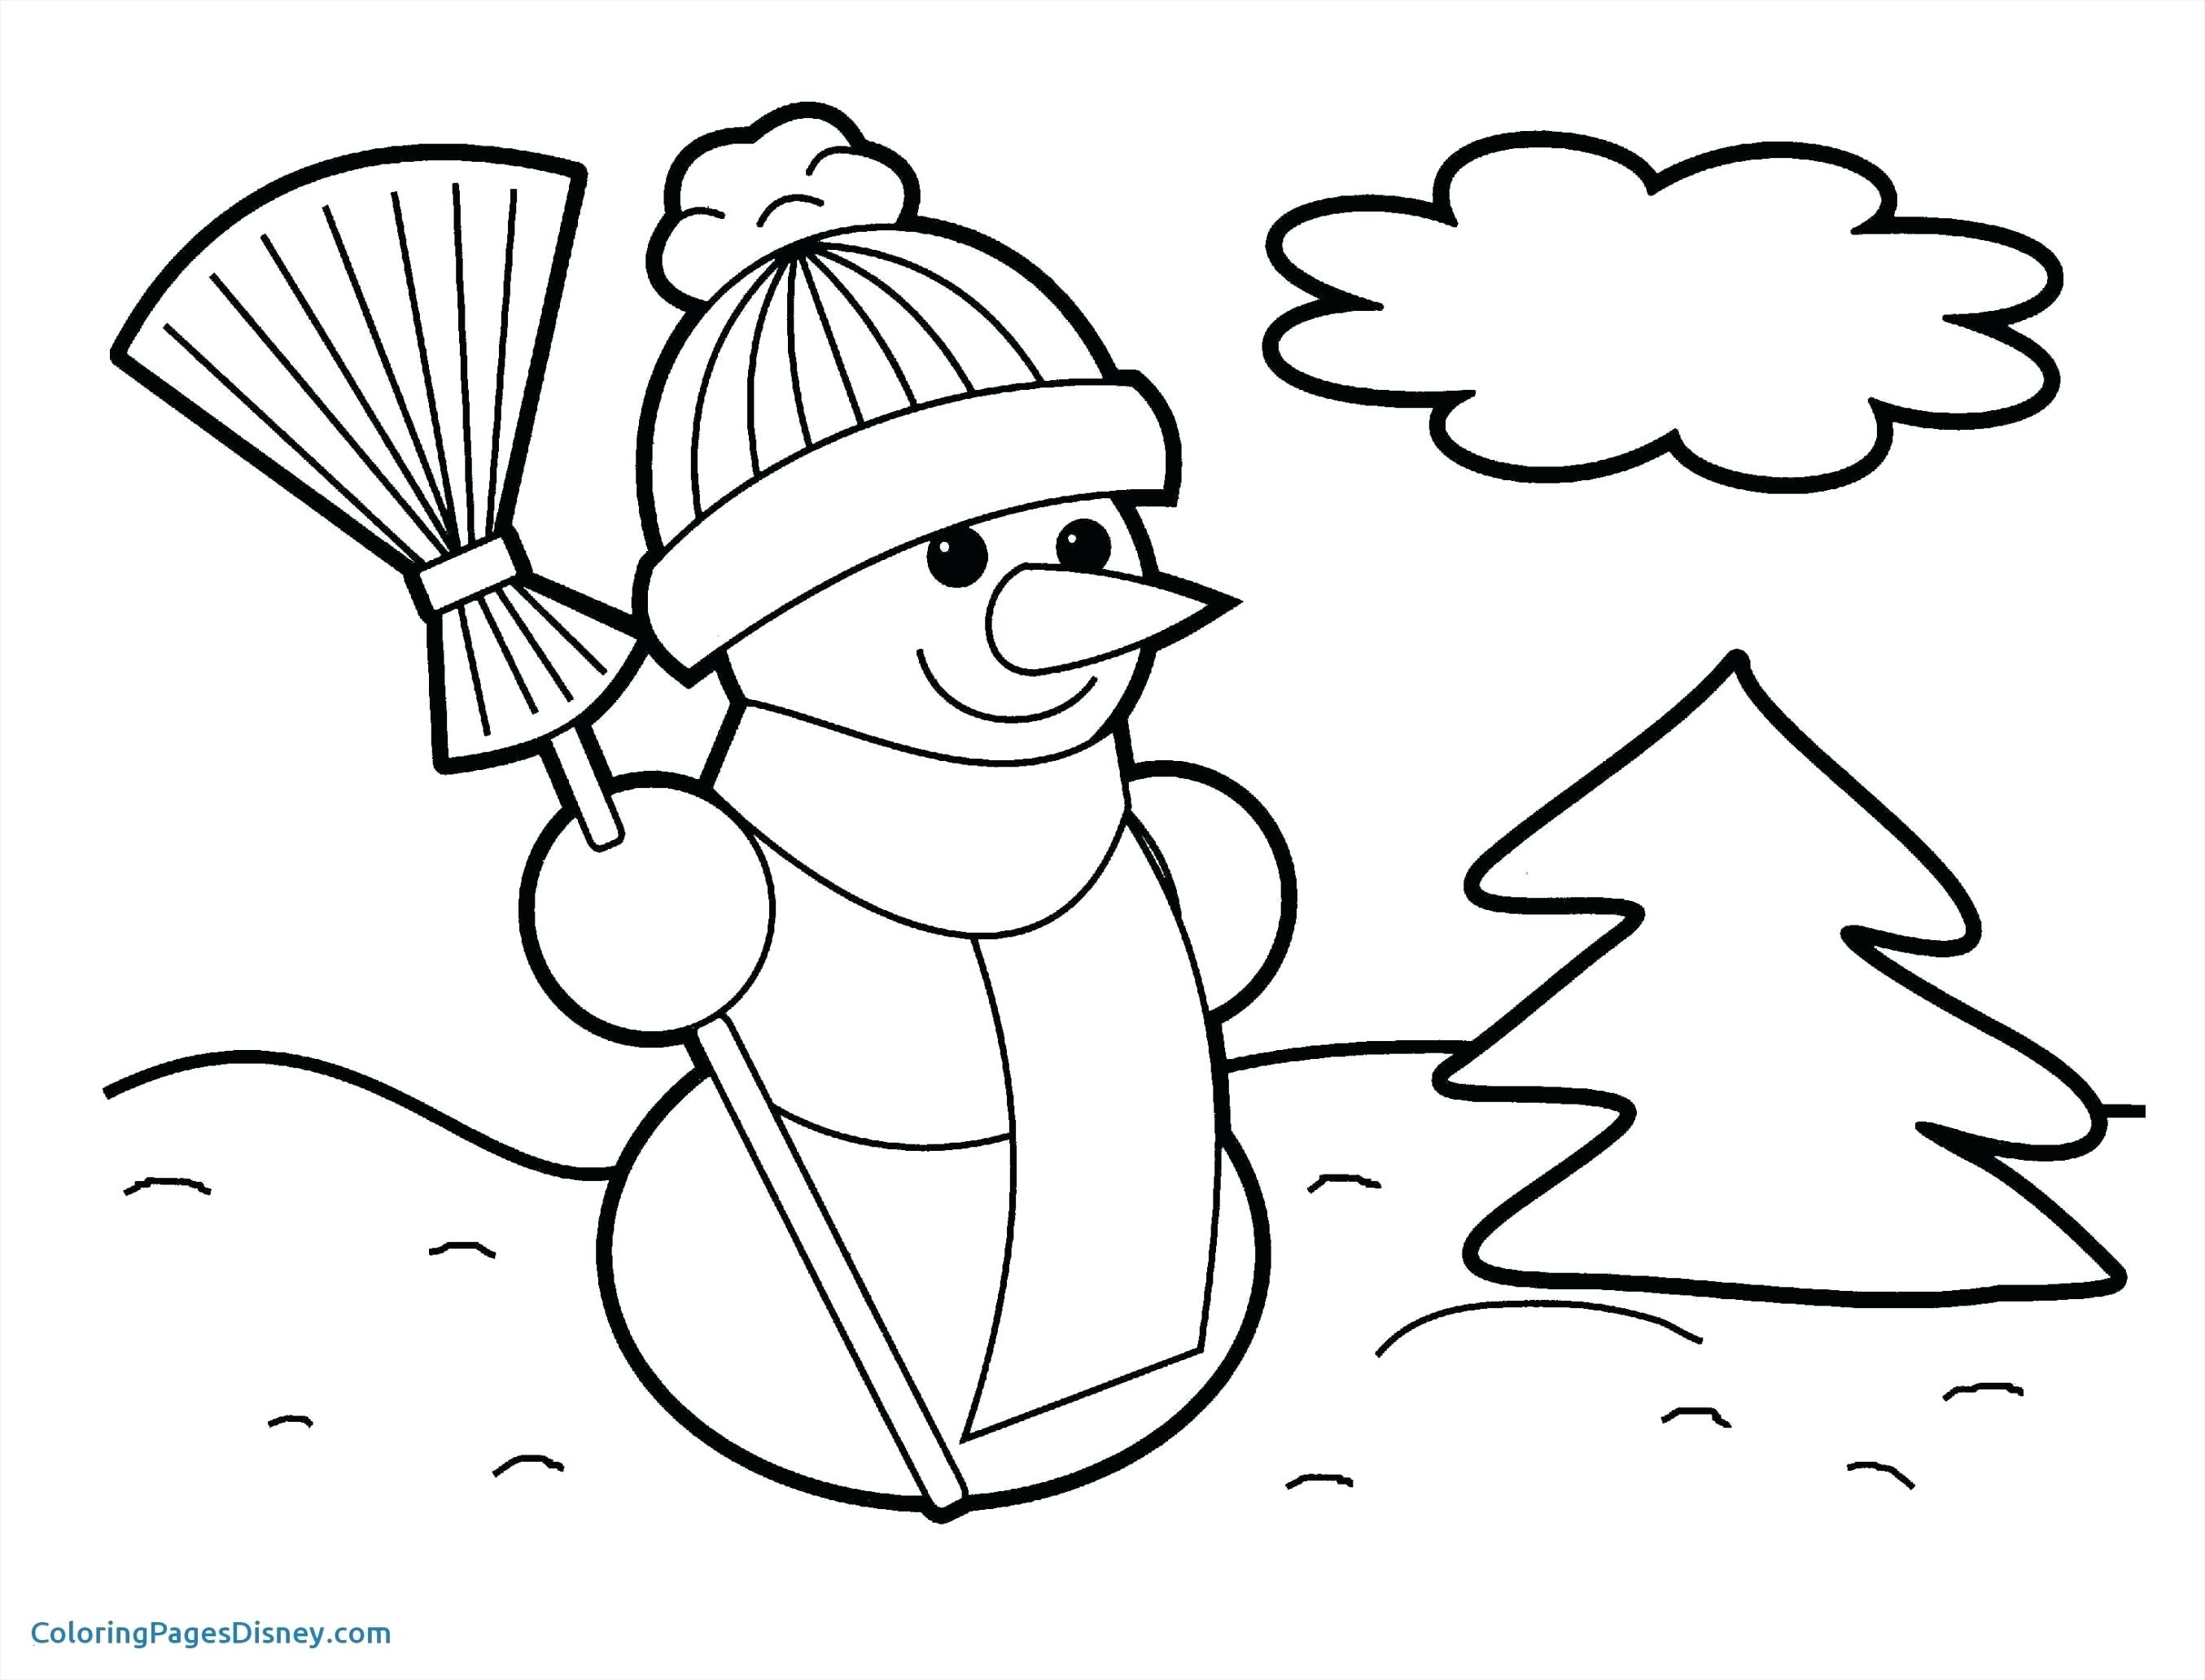 Superman Christmas Coloring Pages Superman For Coloring Crunchprintco